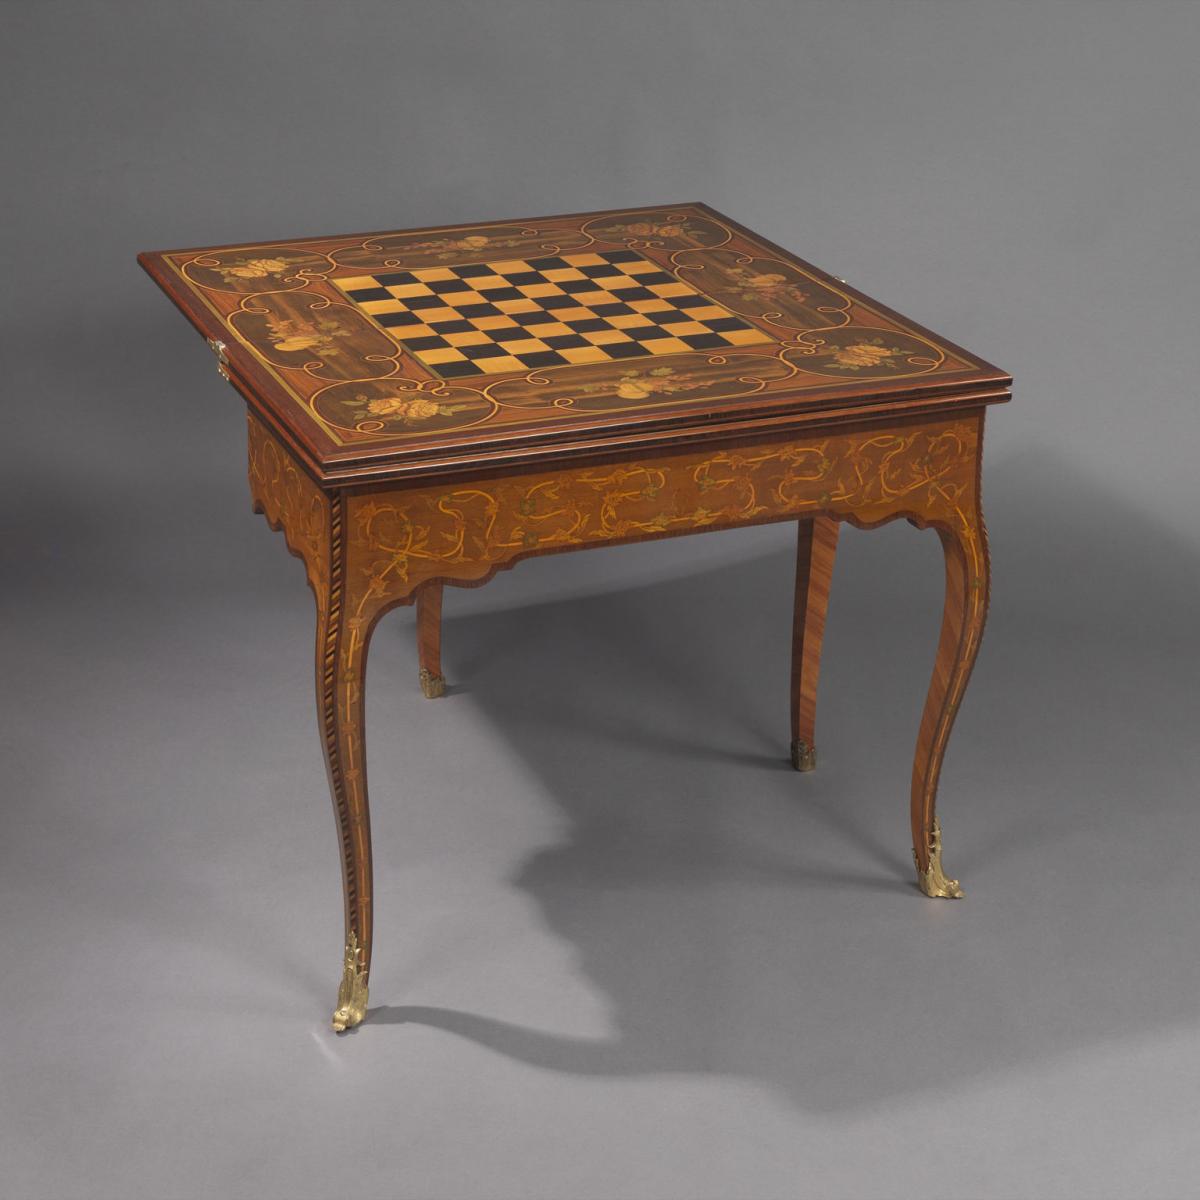 A Russian Imperial Period Triple Turn-Over Games Table